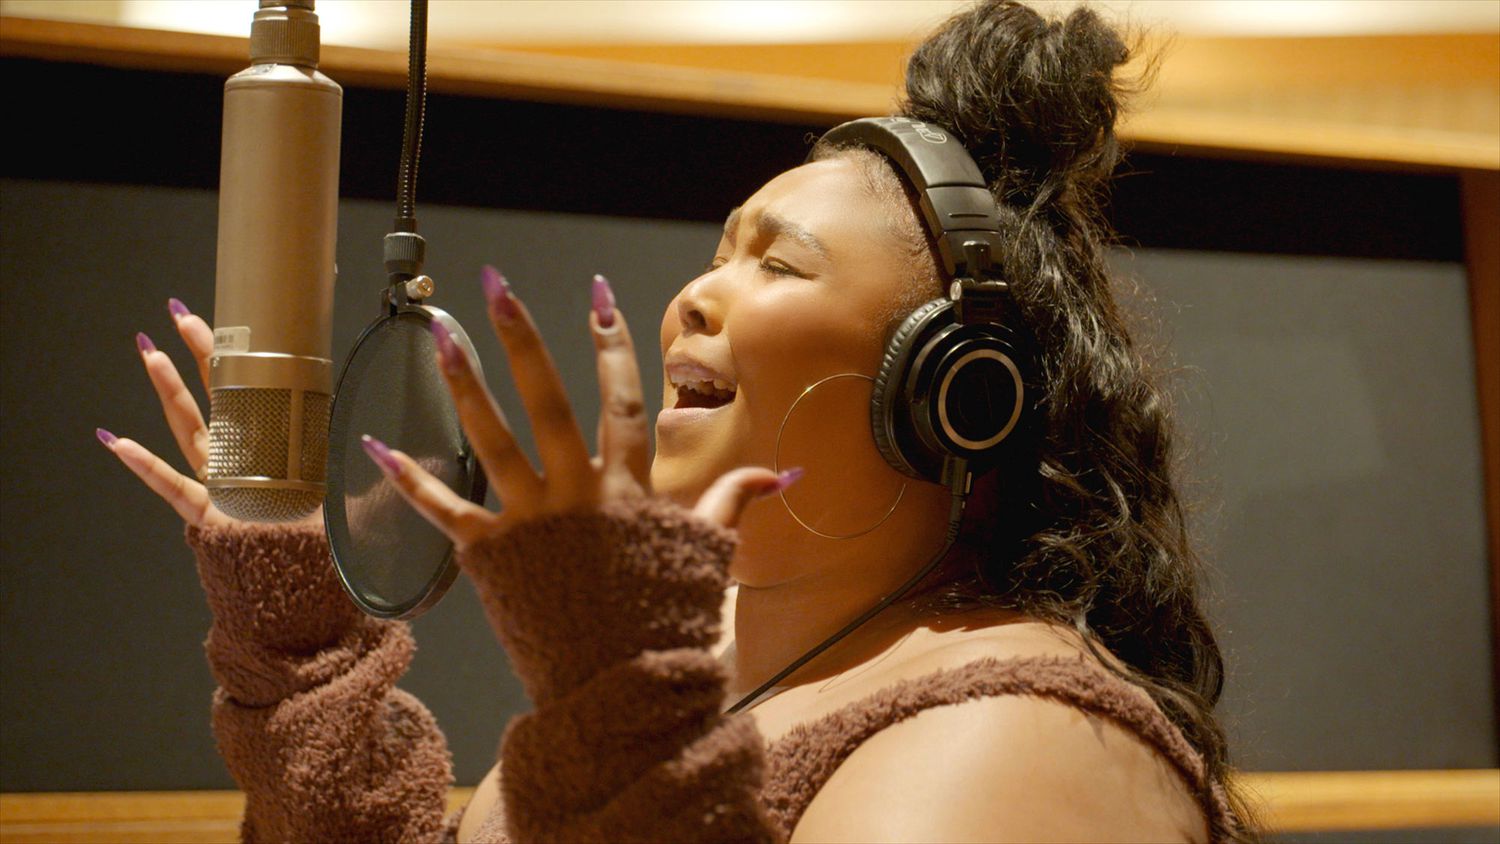 Lizzo recording 'About Damn Time,' as seen in 'Love, Lizzo'